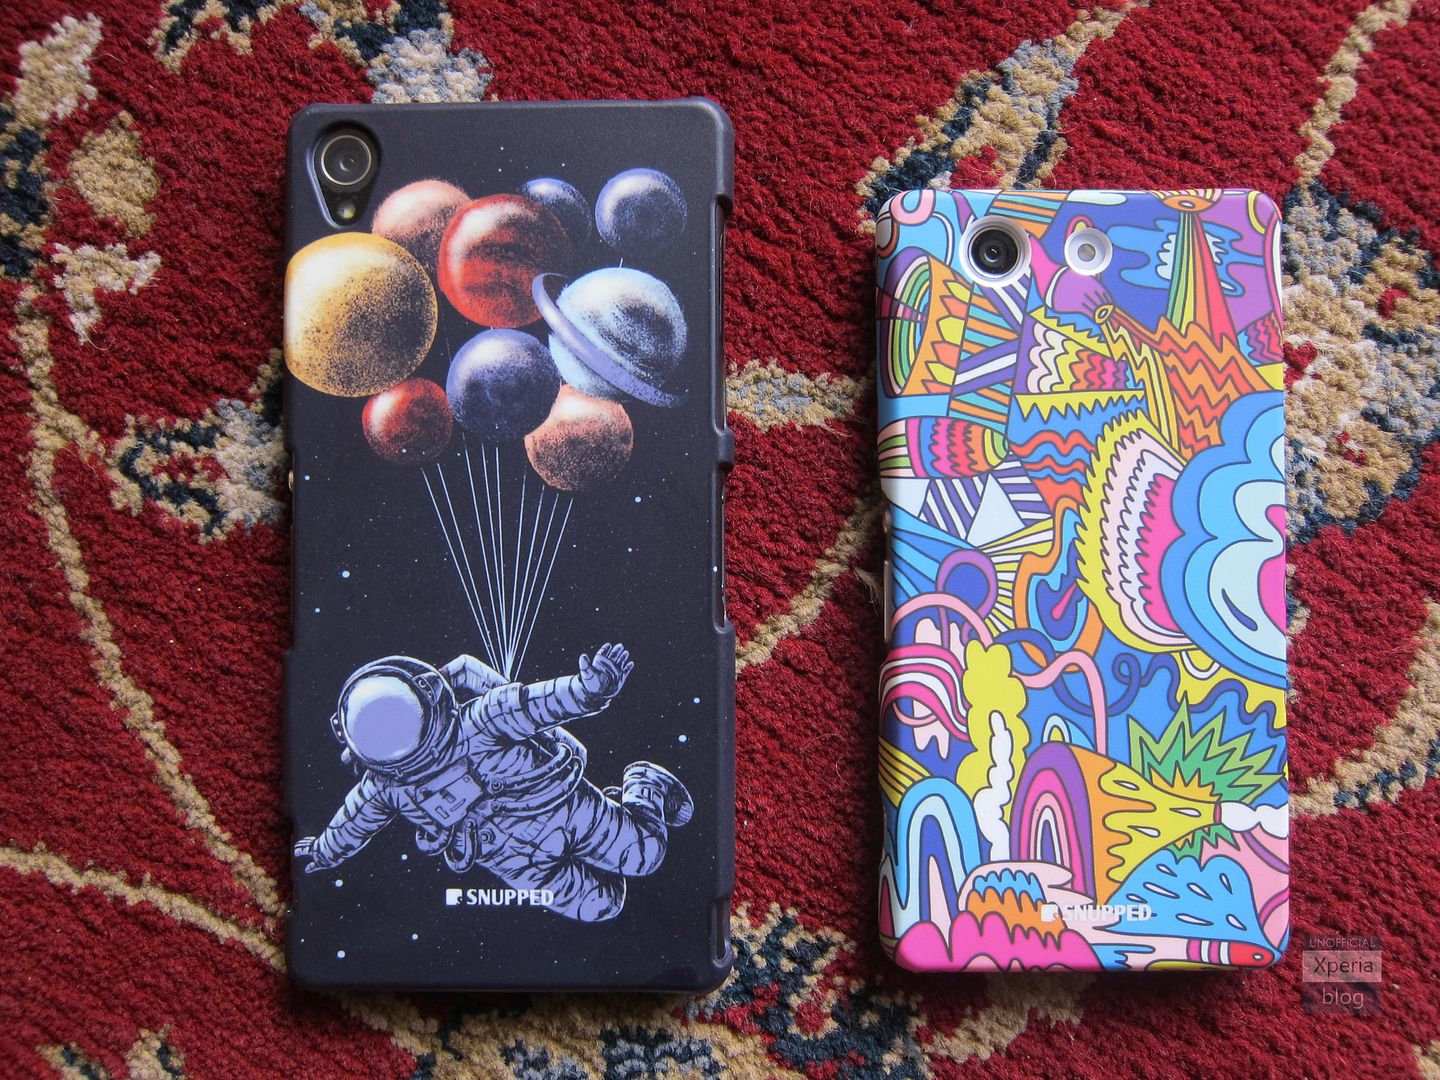 Snupped custom case for Xperia Z3 and Z3 Compact